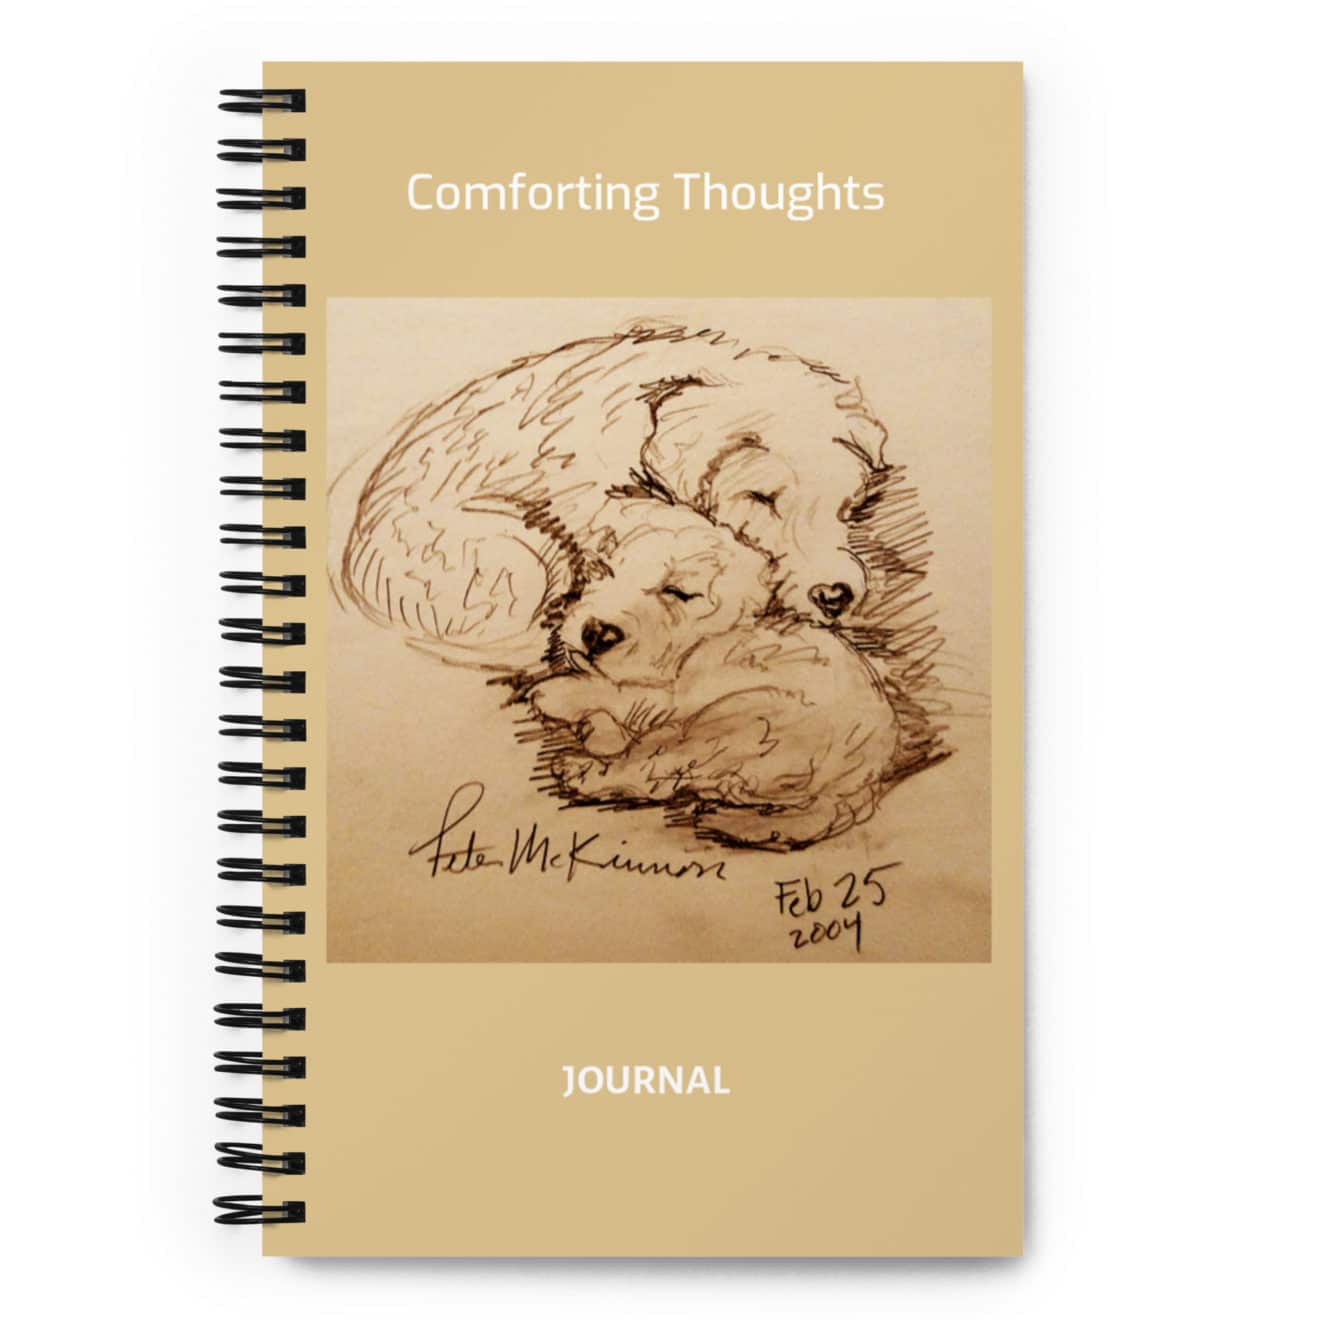 Calm your thoughts journal